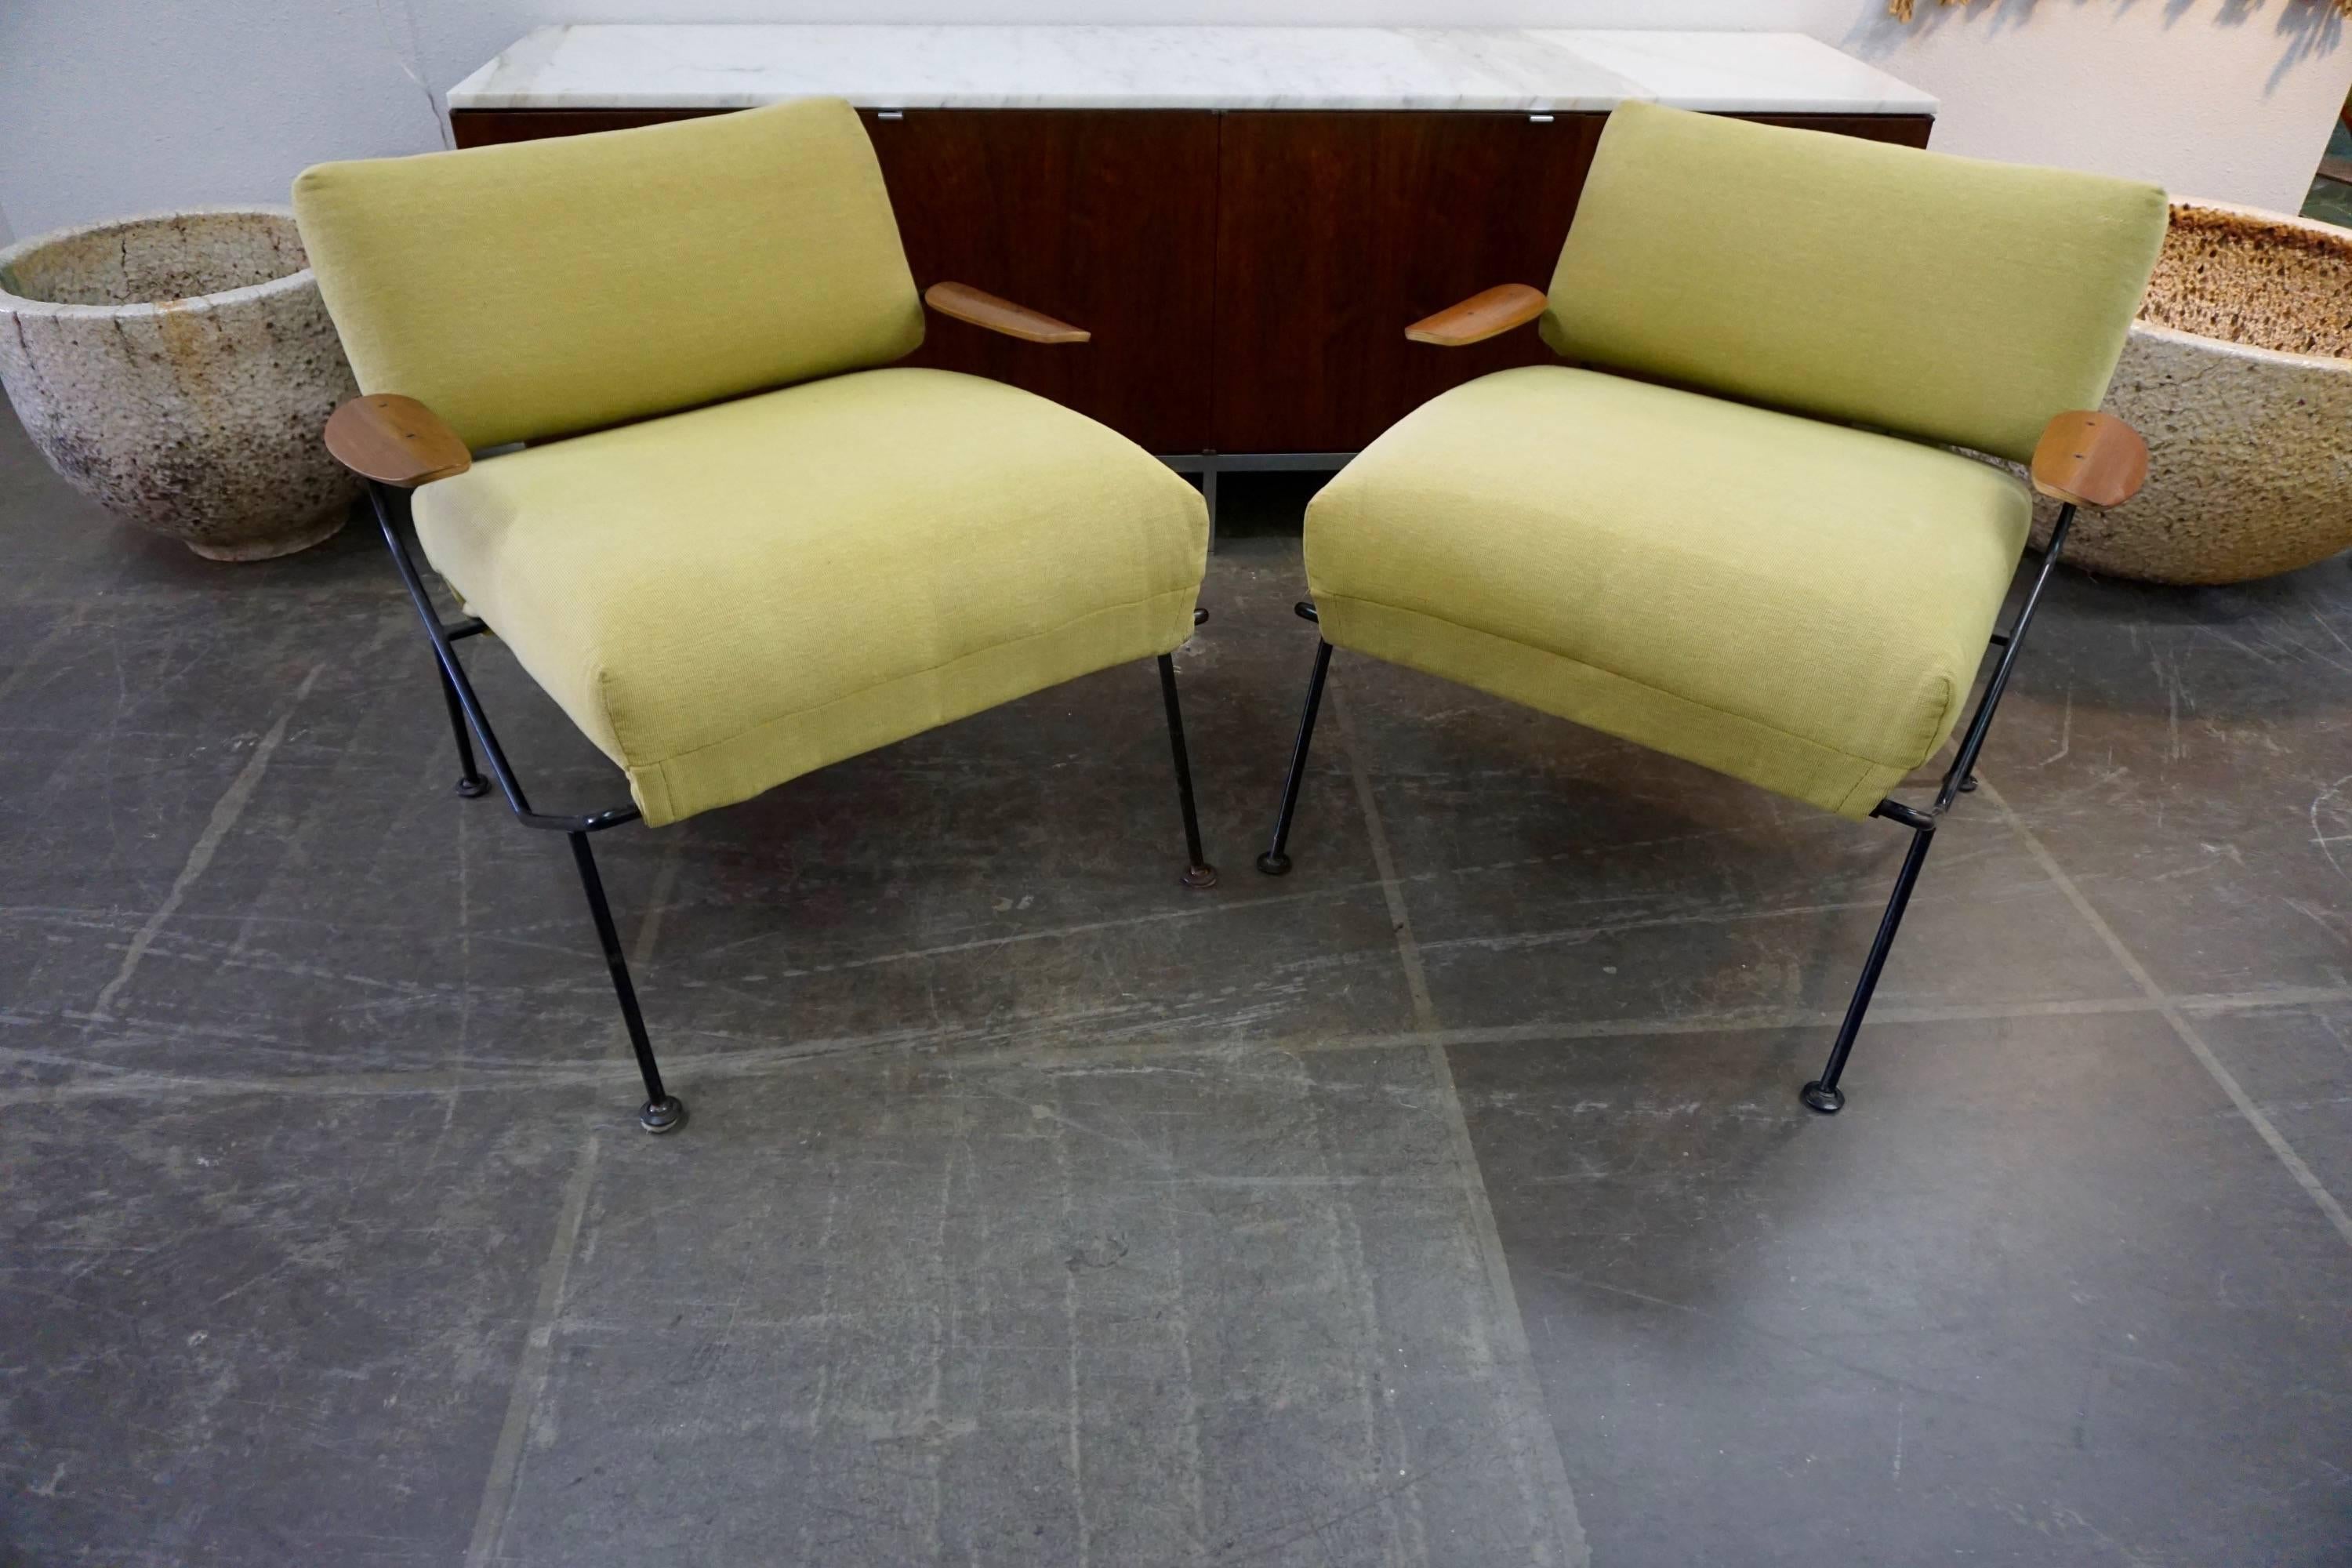 Designed by Dan Johnson in the 1950s for the Selig Furniture Co. Wrought iron frames, pea green cotton fabric, walnut bent plywood armrests.